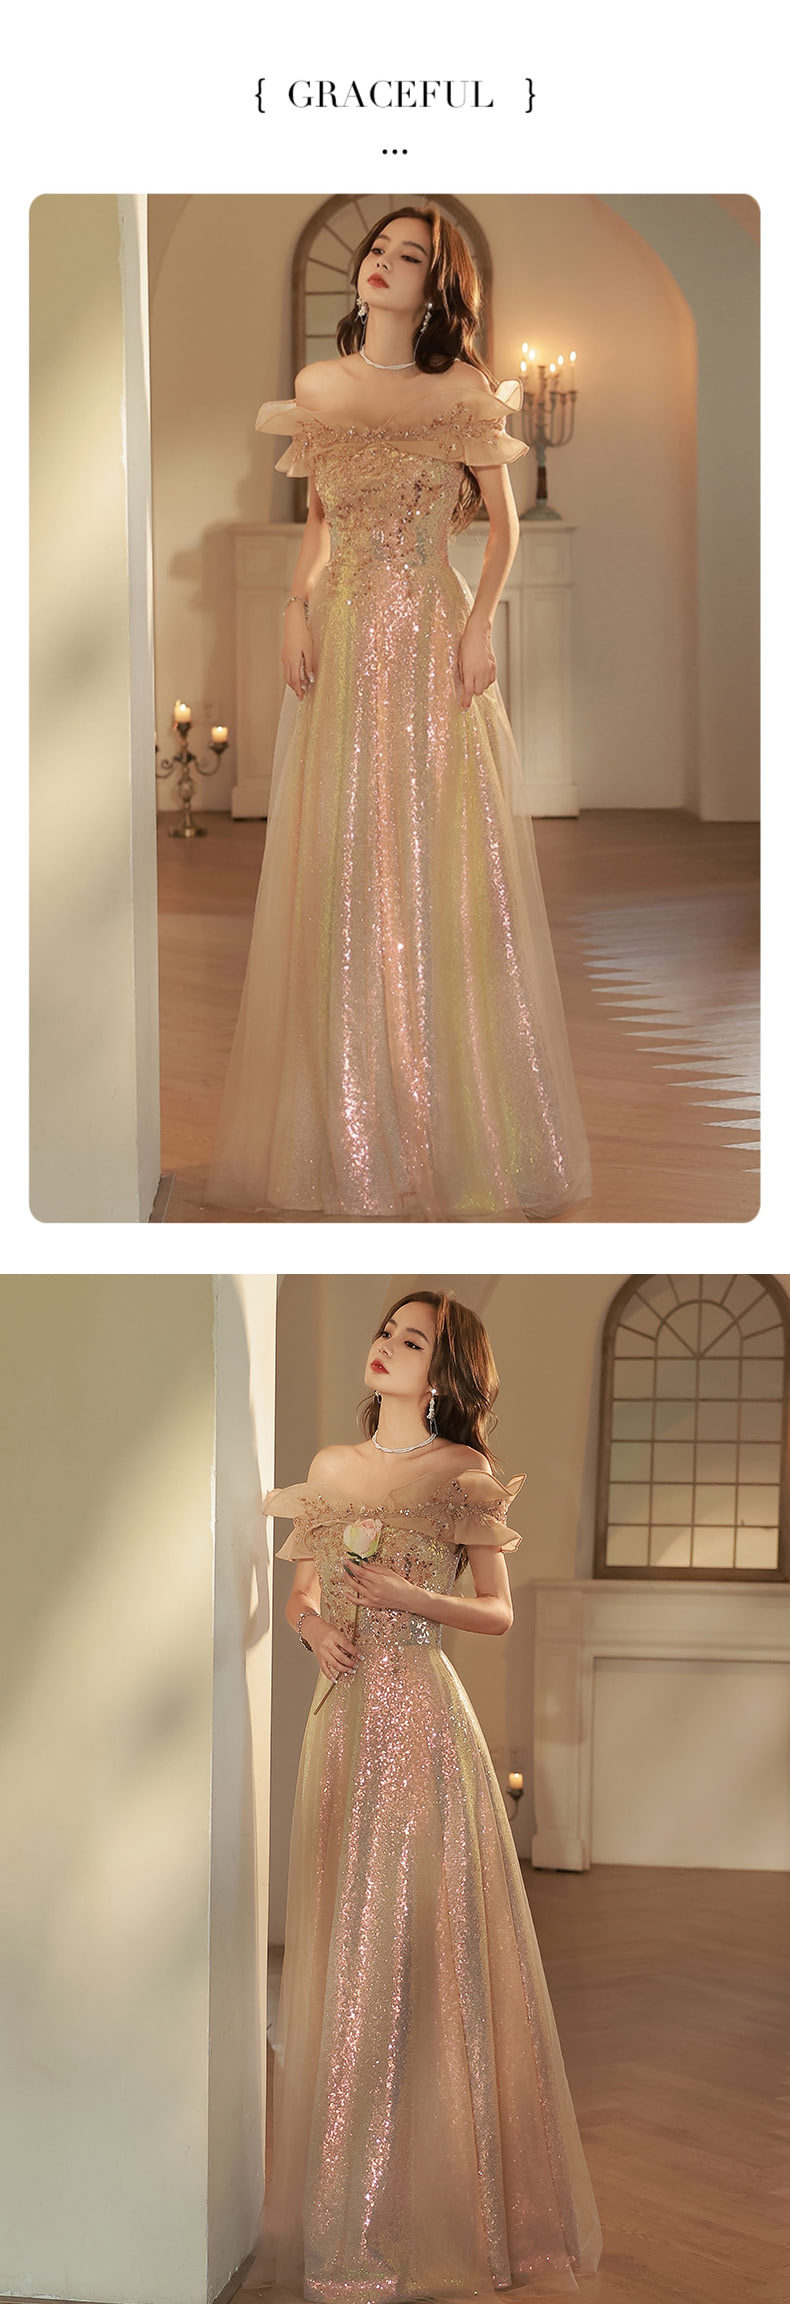 Luxury-Off-Shoulder-Sequin-Glitter-Sparkly-Long-Evening-Party-Dress10.jpg